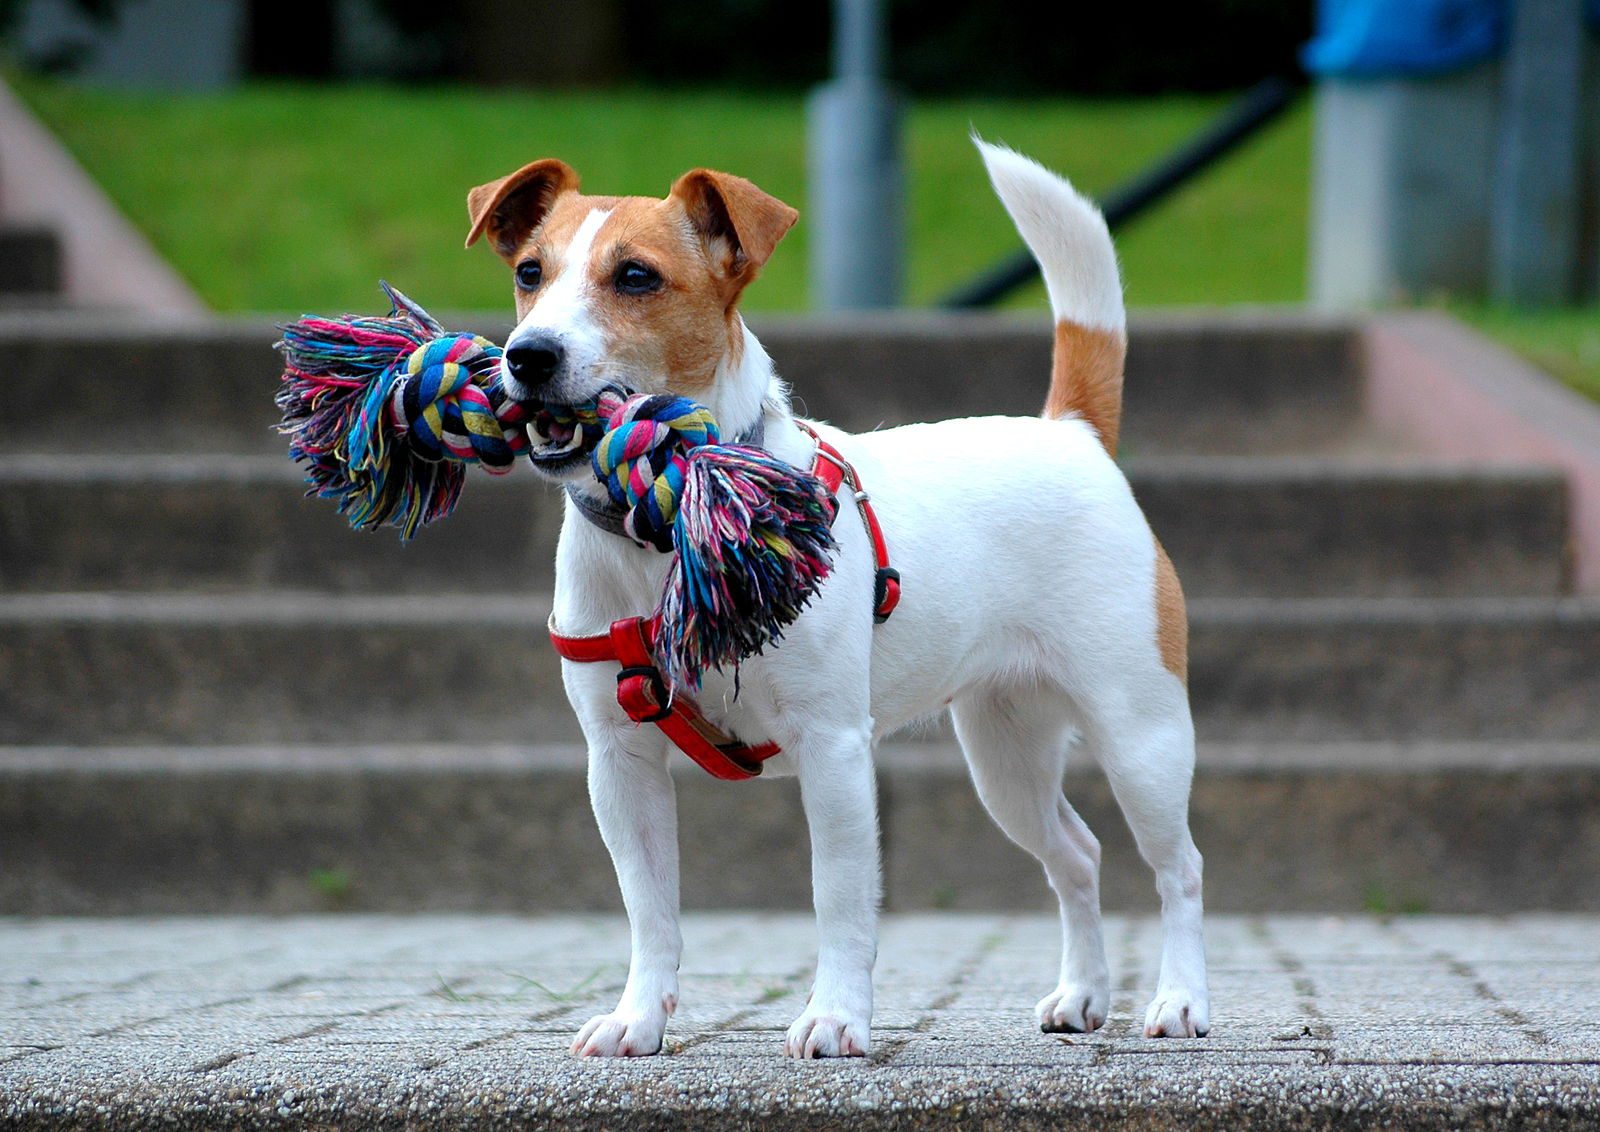 do terrier mix dogs shed